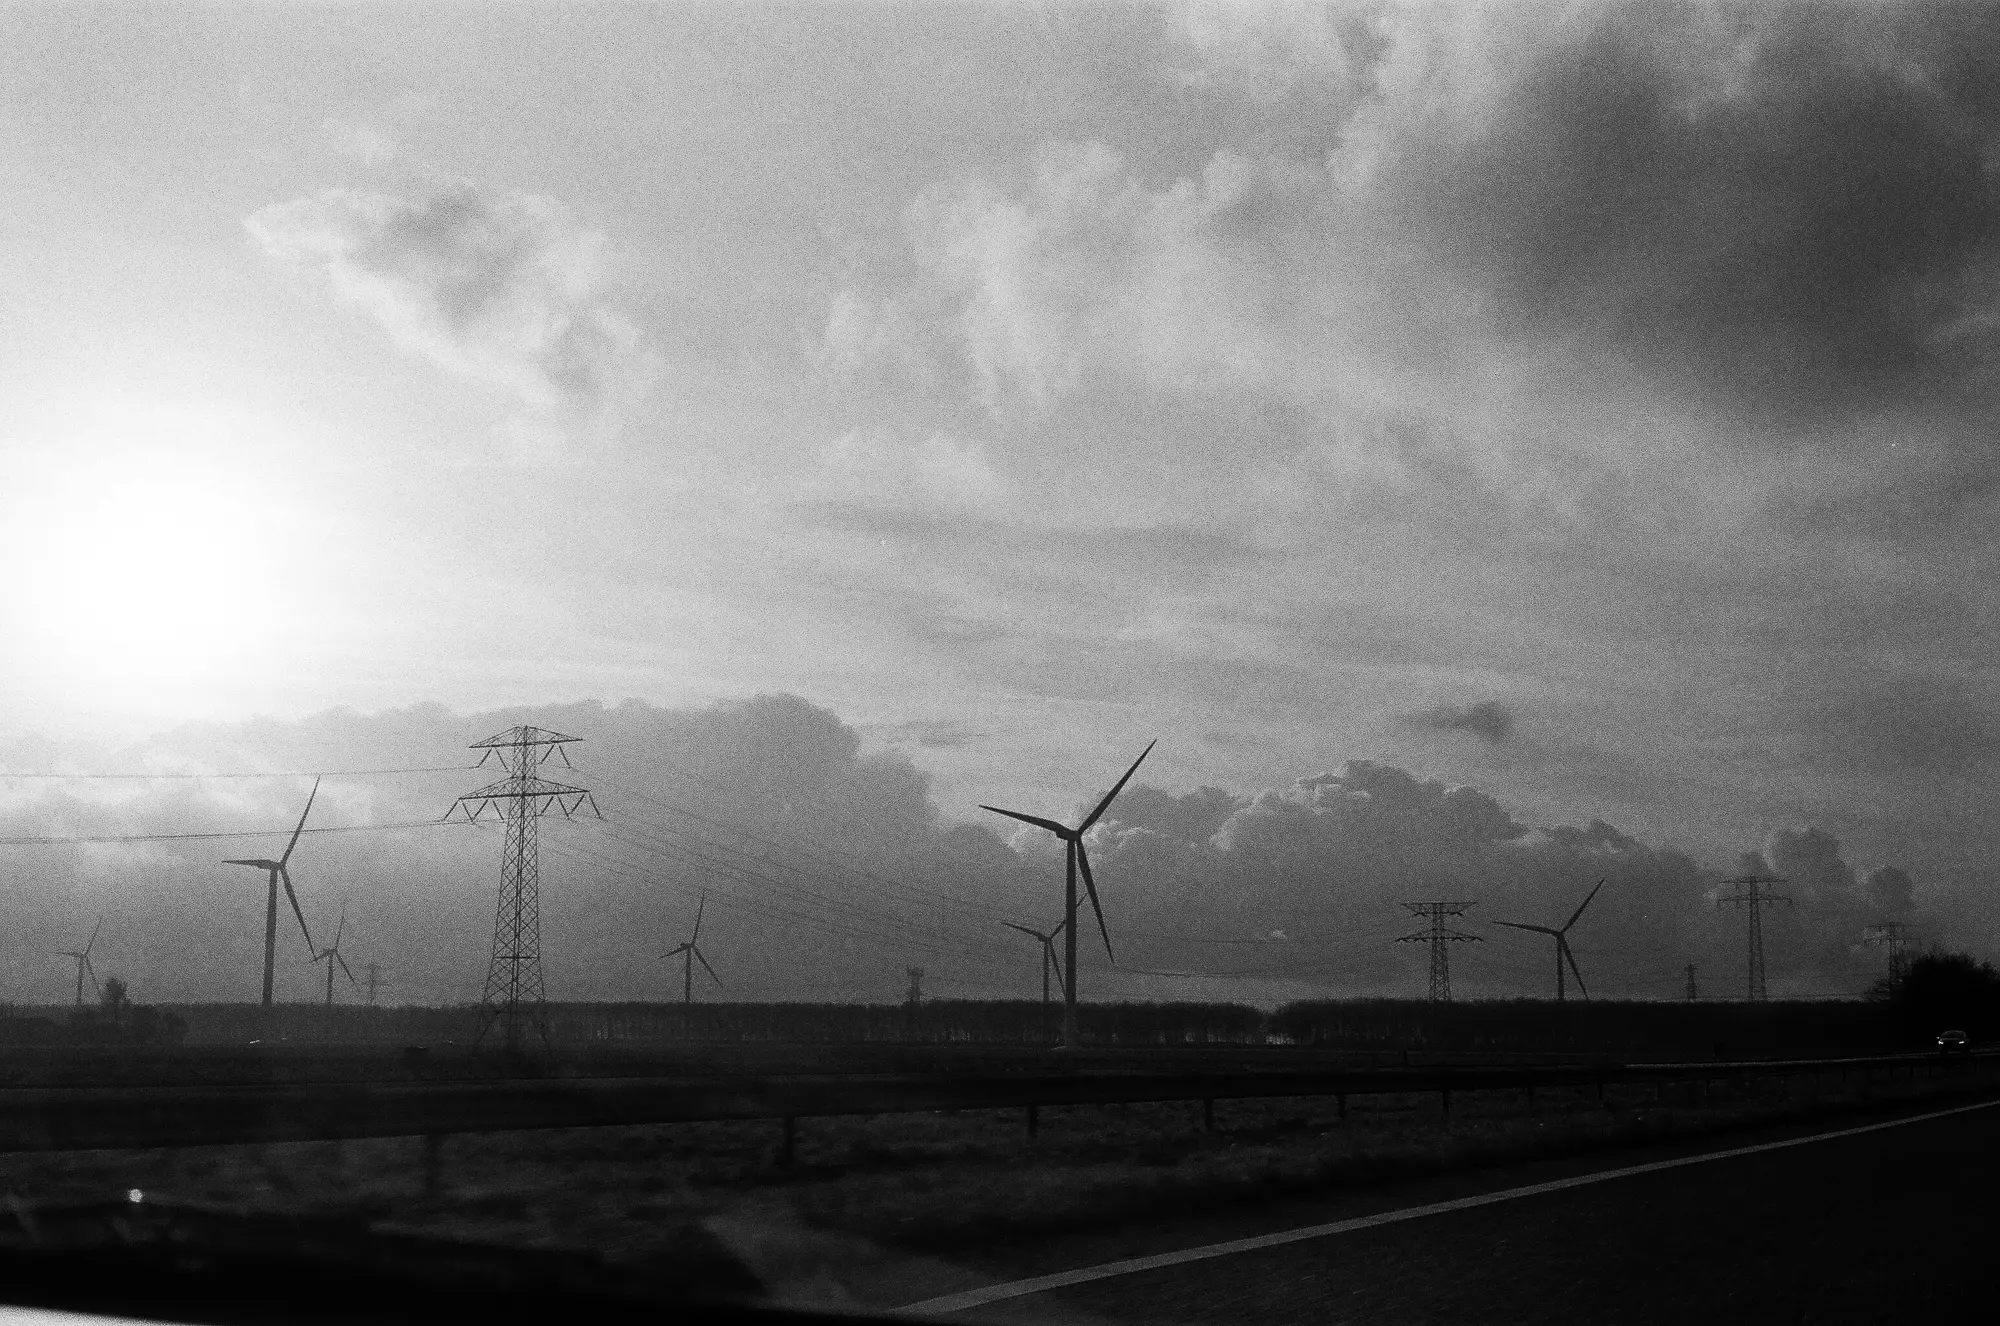 Taken from a driving car, so long exposure was out of the question. It looks underexposed to me, but the negative looks fine and I like the clouds. Btw, typical Dutch flat landscape!